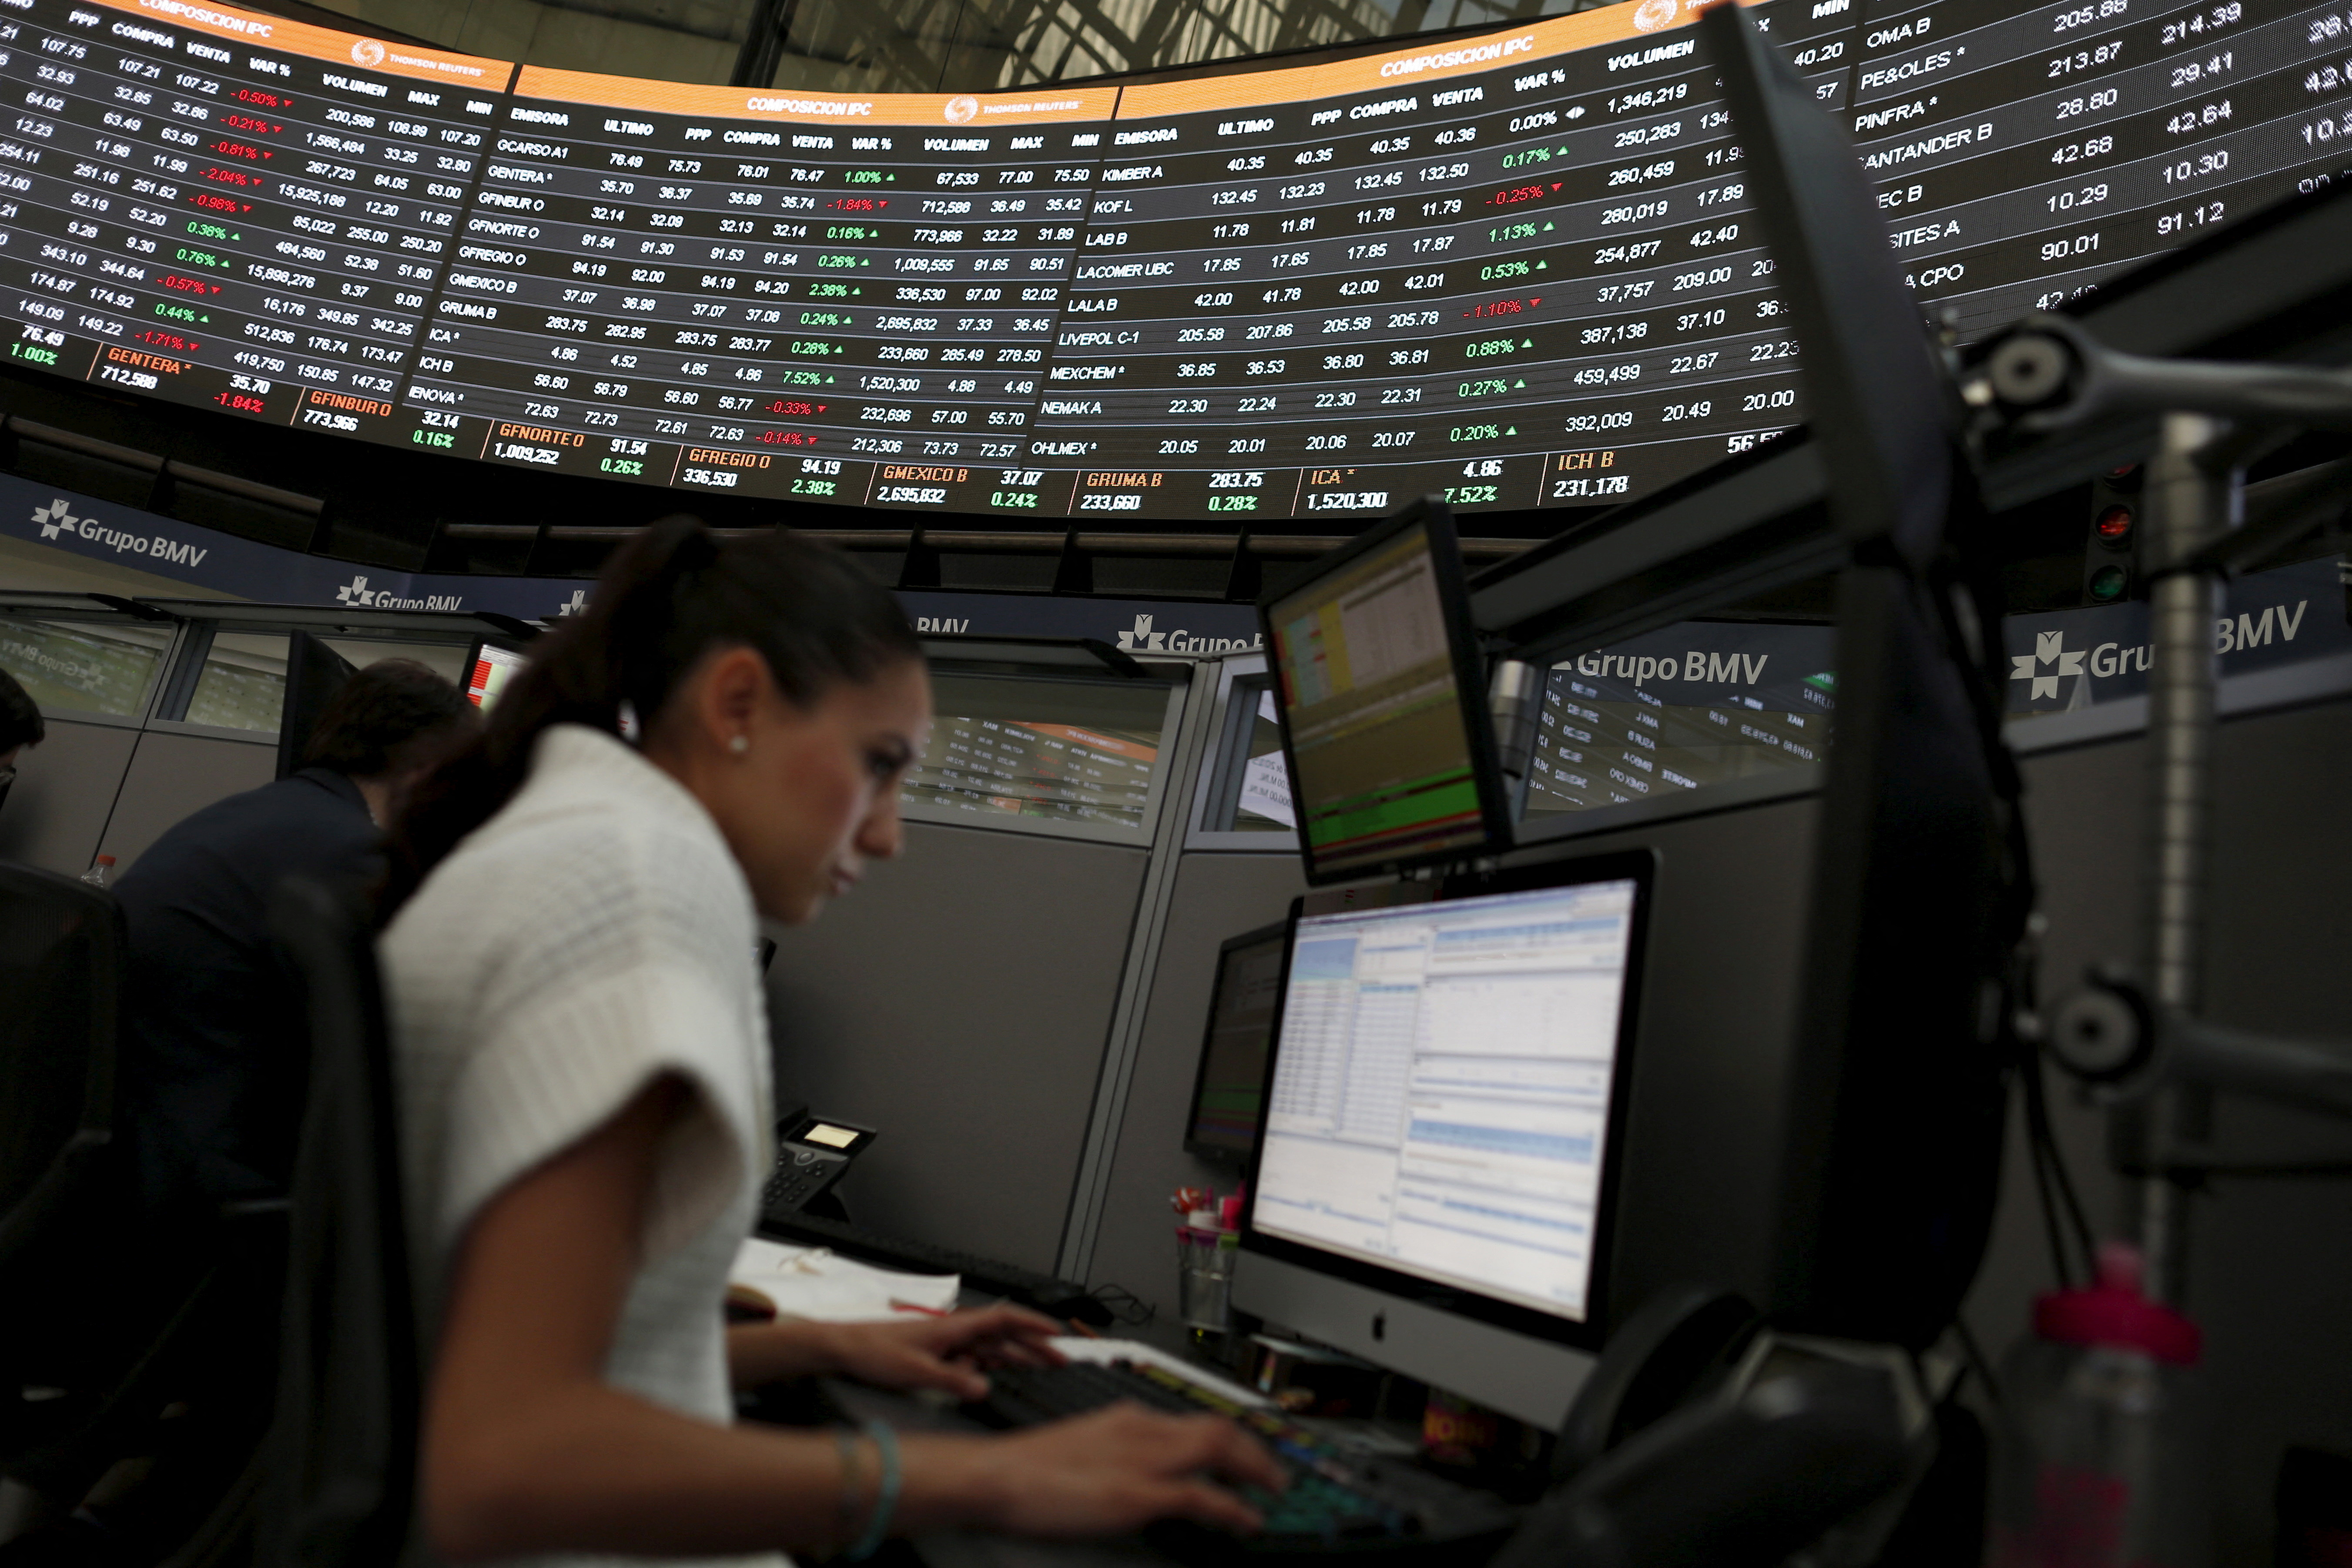 A worker is seen inside the Mexican stock market building in Mexico City, Mexico